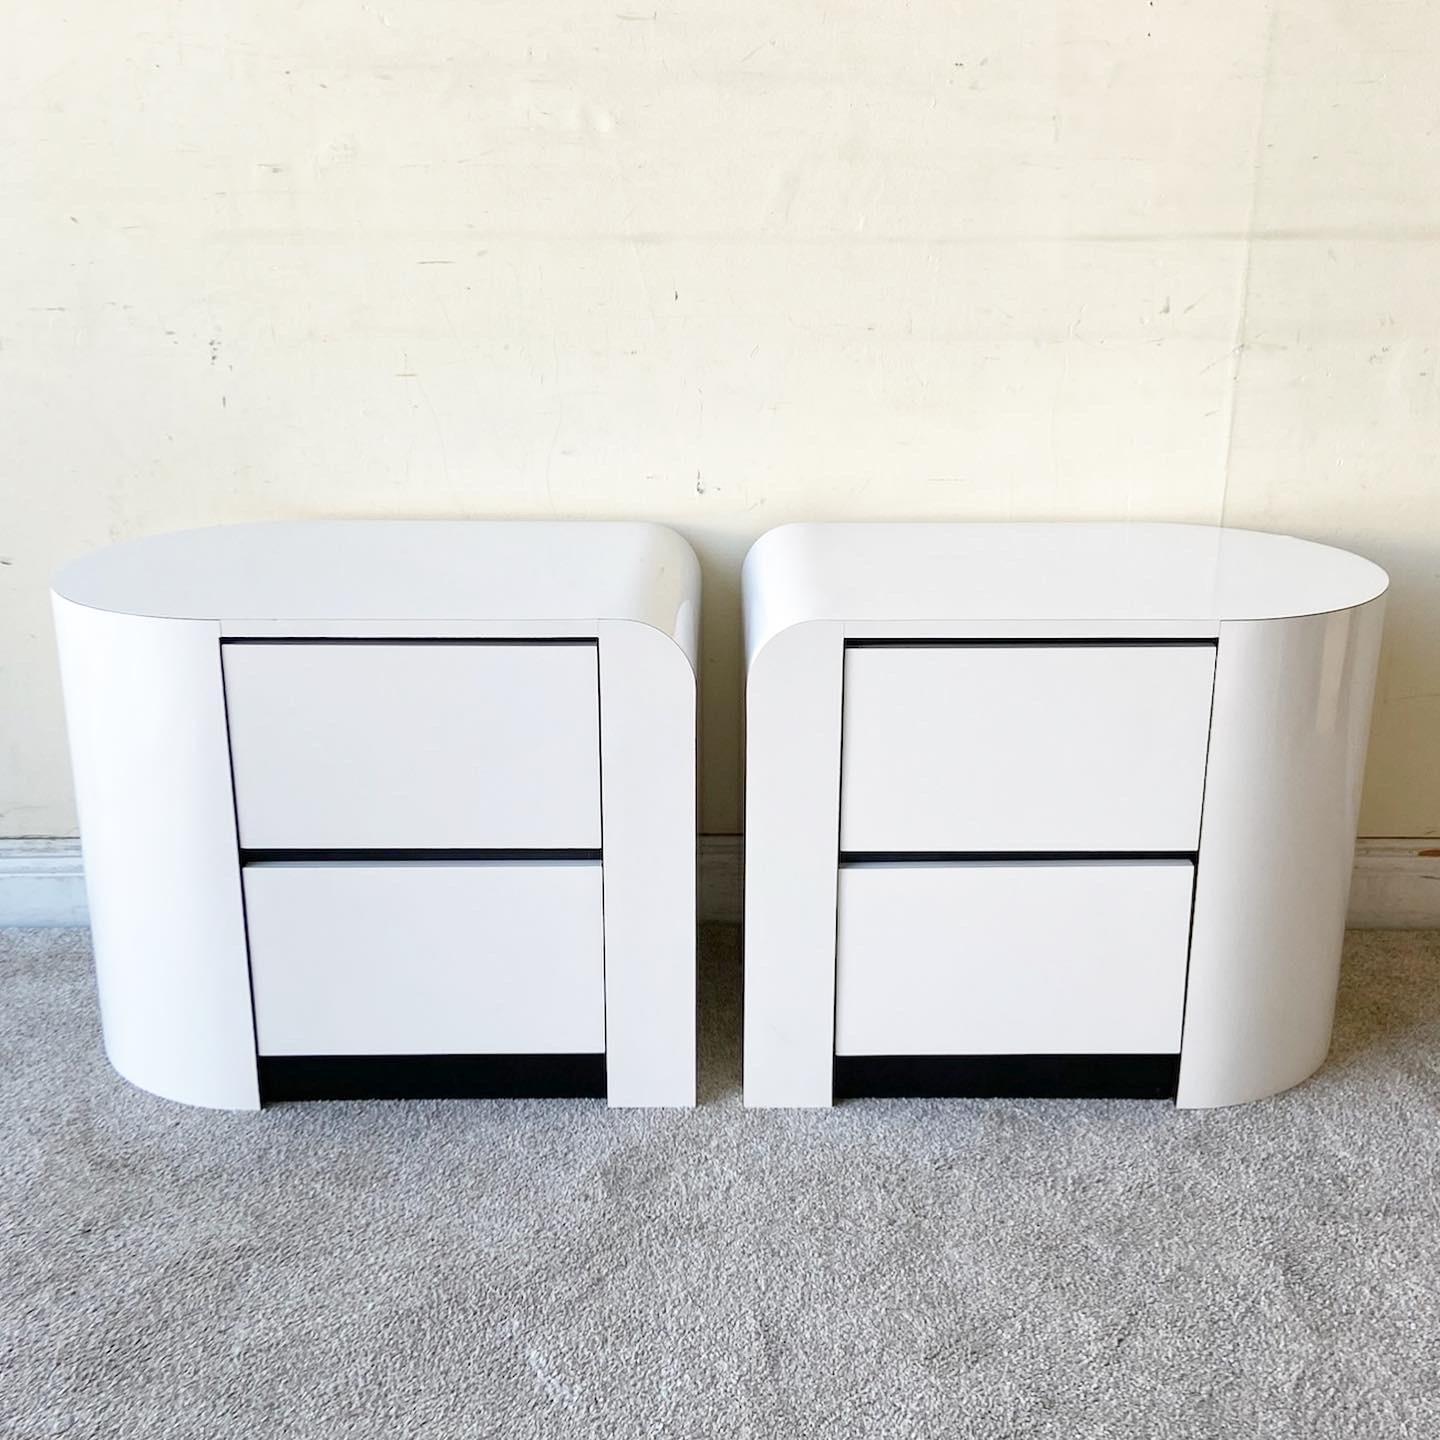 Amazing vintage postmodern pair of nightstands. Each feature a white lacquer laminate with black laminate bordering the drawers. A unique construction displays a waterfall edge on one side and the other side half rounded. 